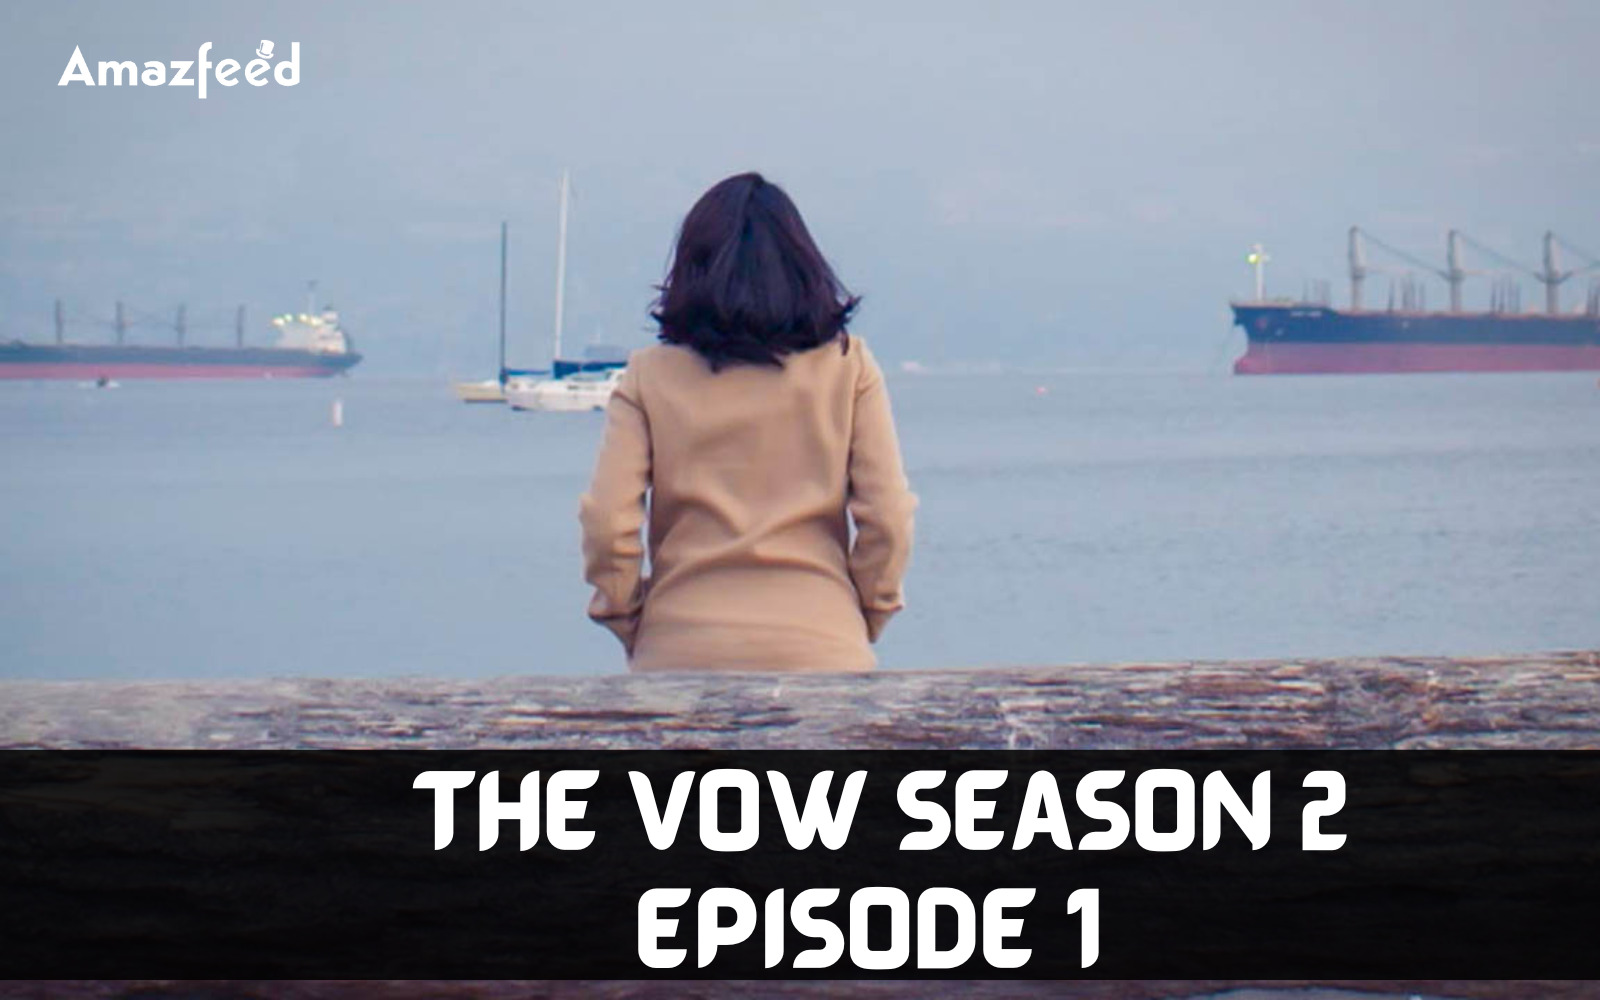 When Is The vow season 2 Episode 1 Coming Out (Release Date)